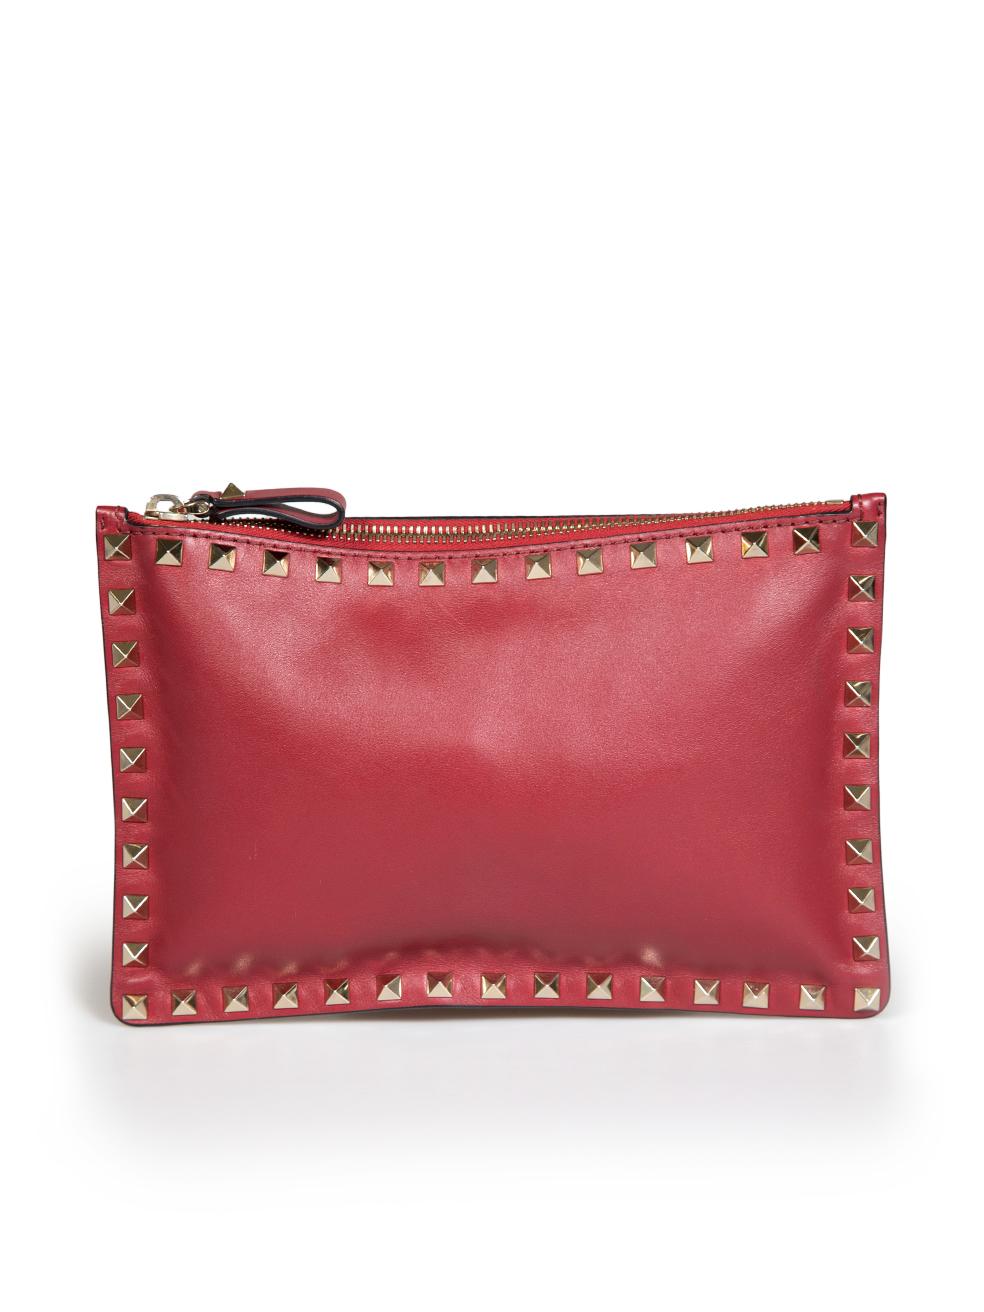 Valentino Garavani Red Leather Rockstud Clutch In Excellent Condition For Sale In London, GB